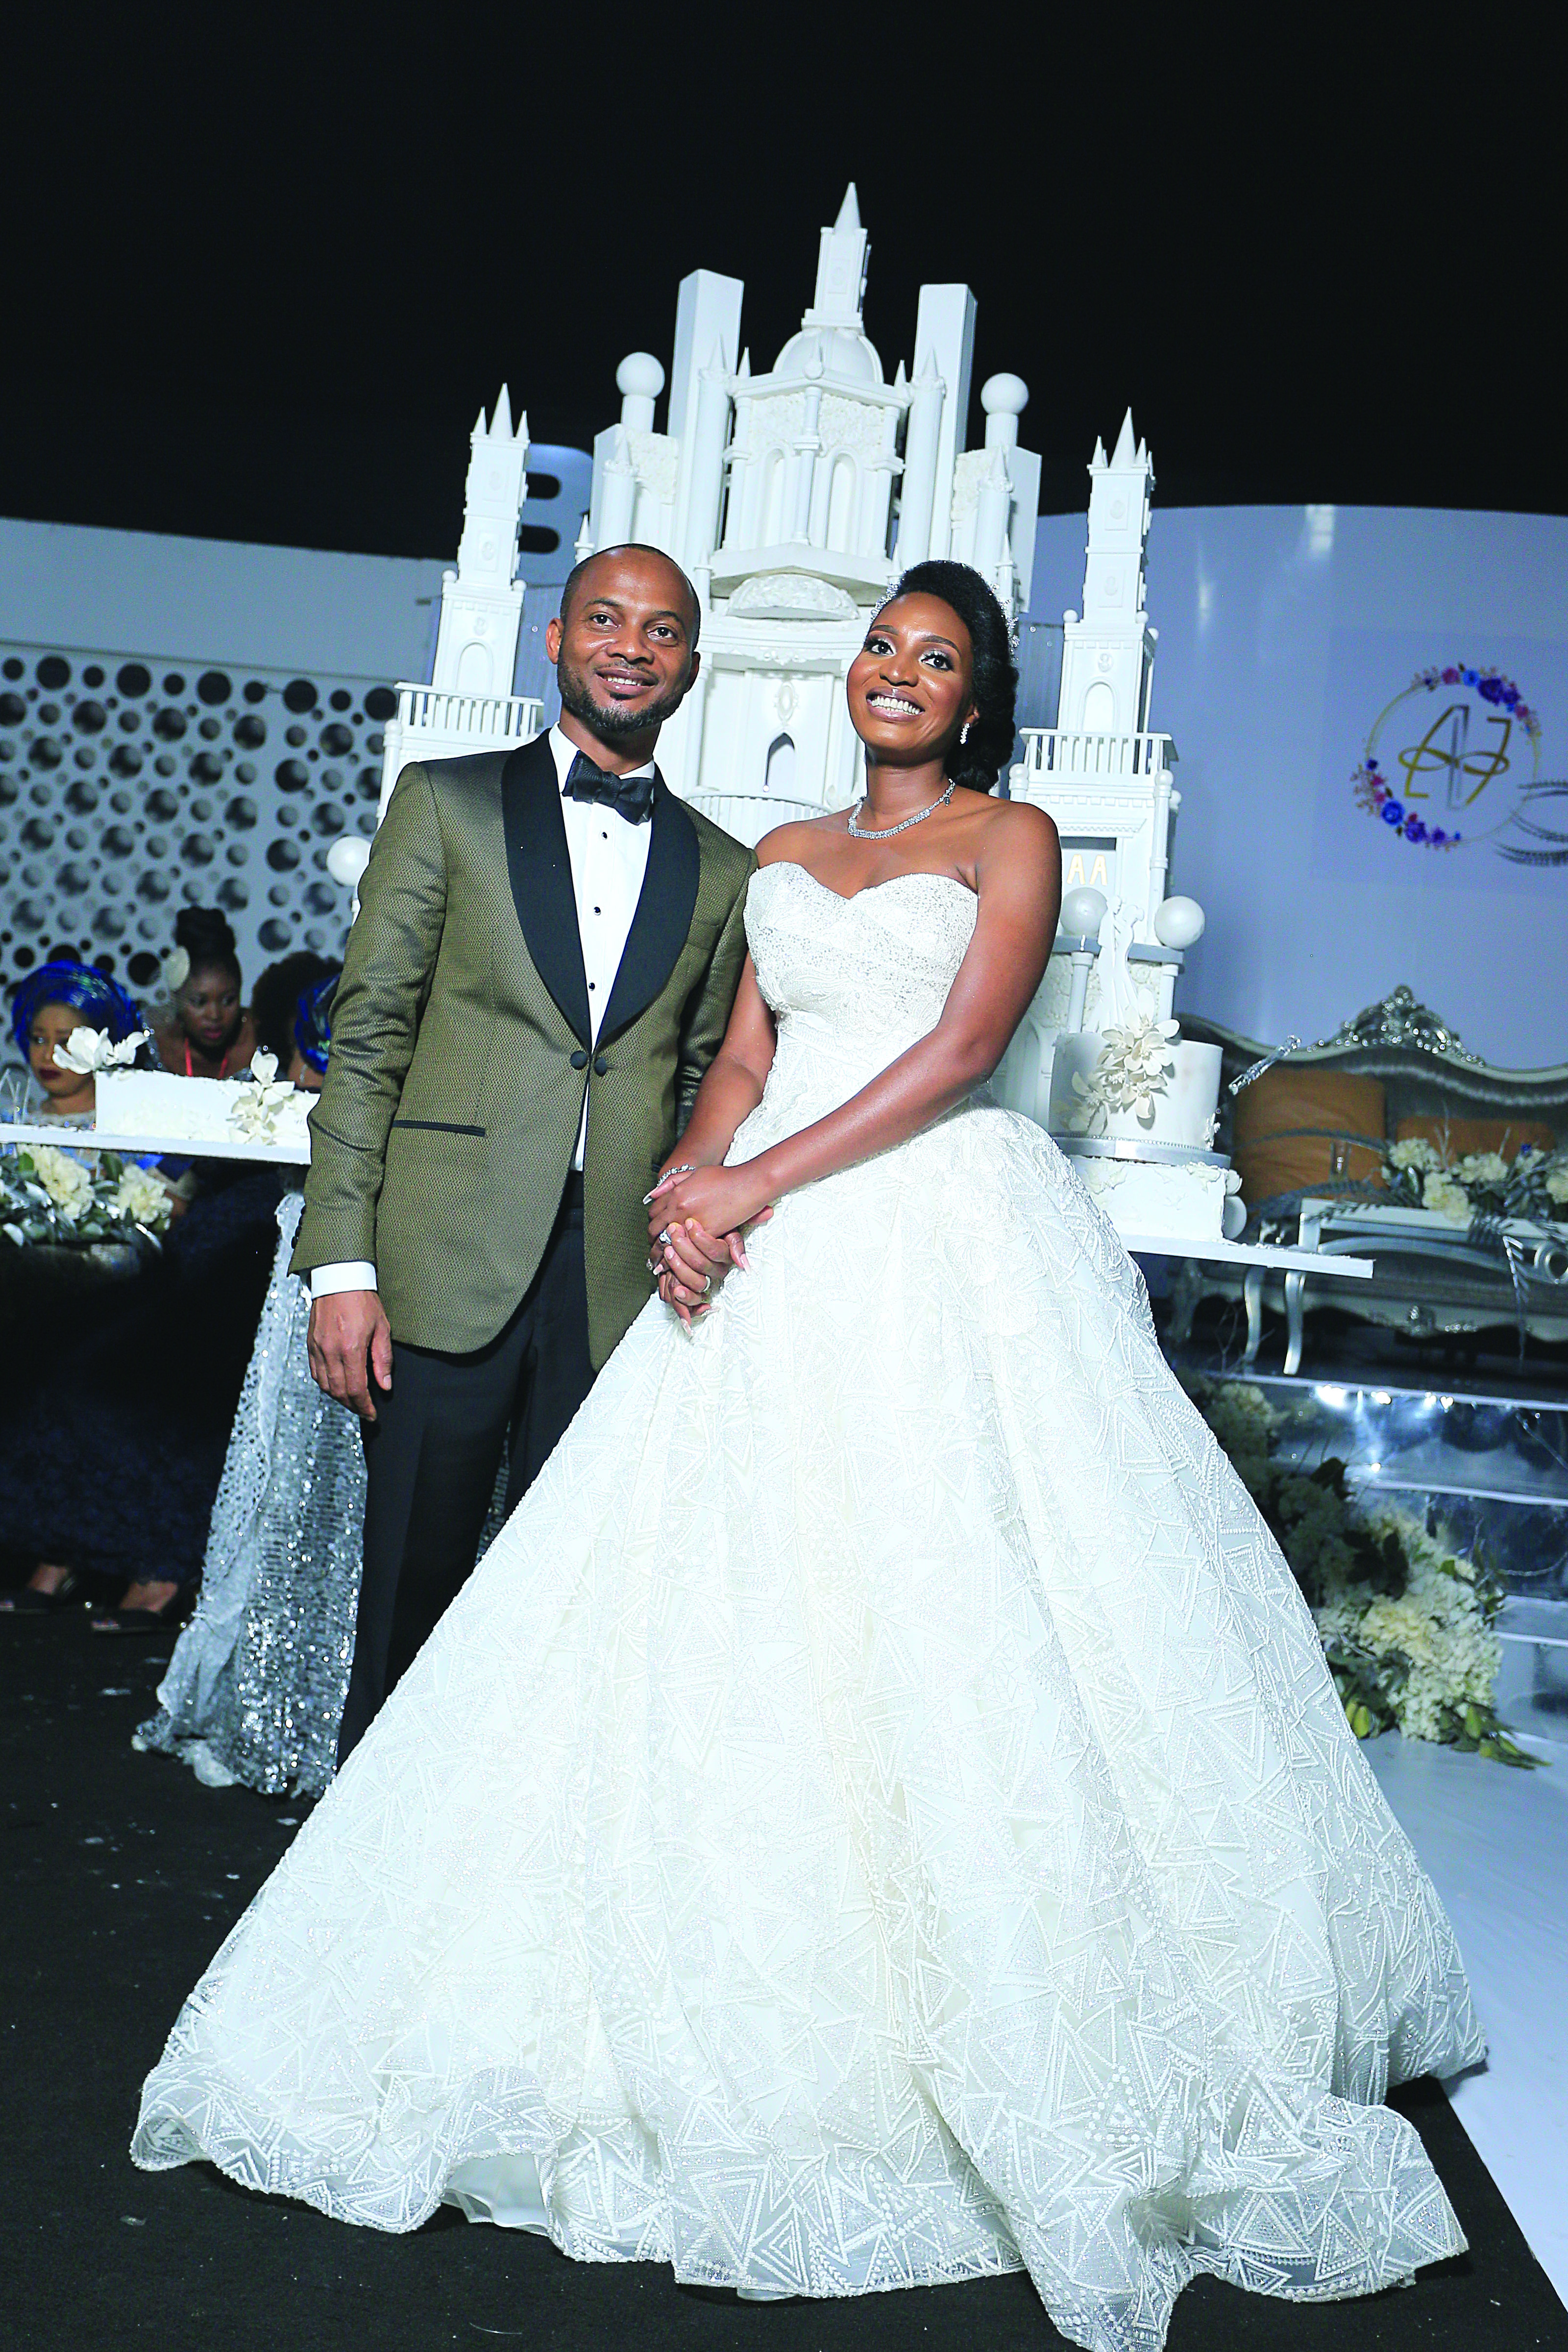 THE REGAL WEDDING OF ADESEKEMI ADEREMI AND ANTHONY ATUCHE IN LAGOS